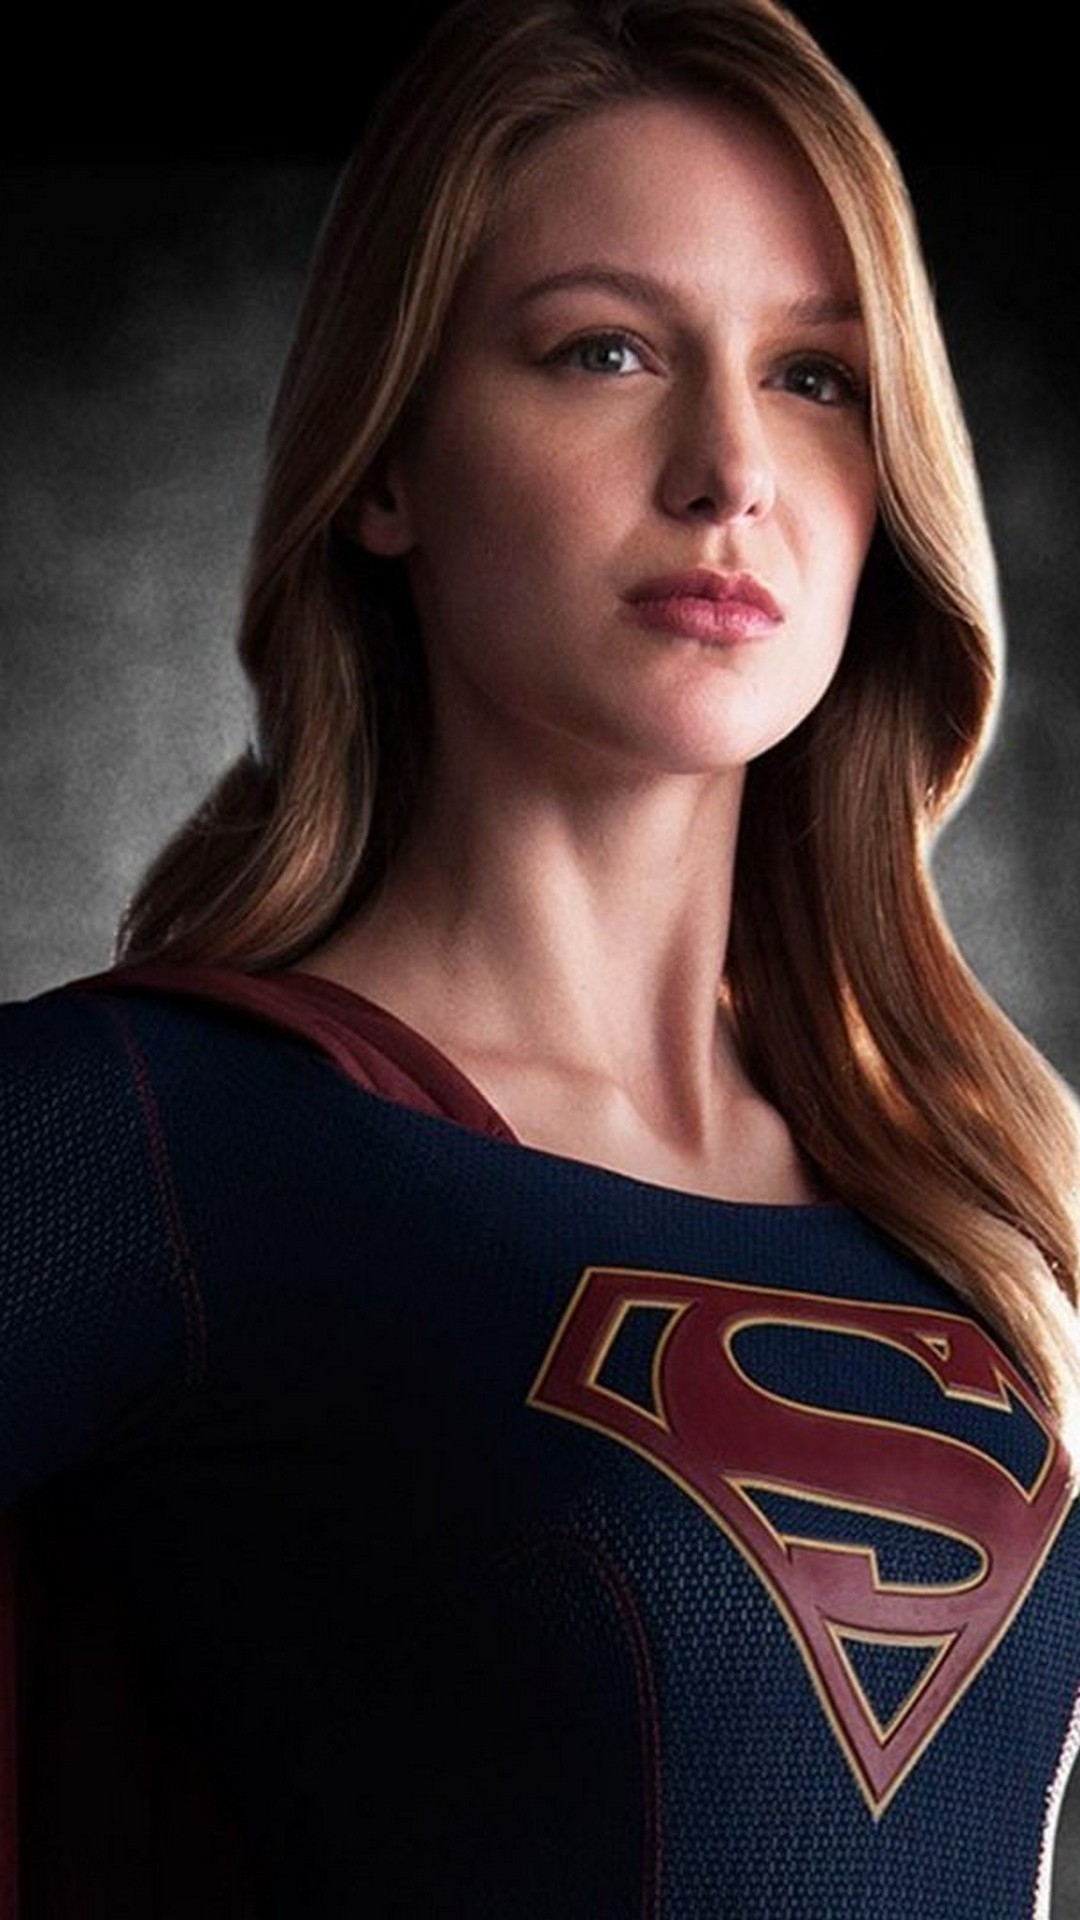 Supergirl iPhone X Wallpaper With high-resolution 1080X1920 pixel. You can use this wallpaper for your iPhone 5, 6, 7, 8, X, XS, XR backgrounds, Mobile Screensaver, or iPad Lock Screen